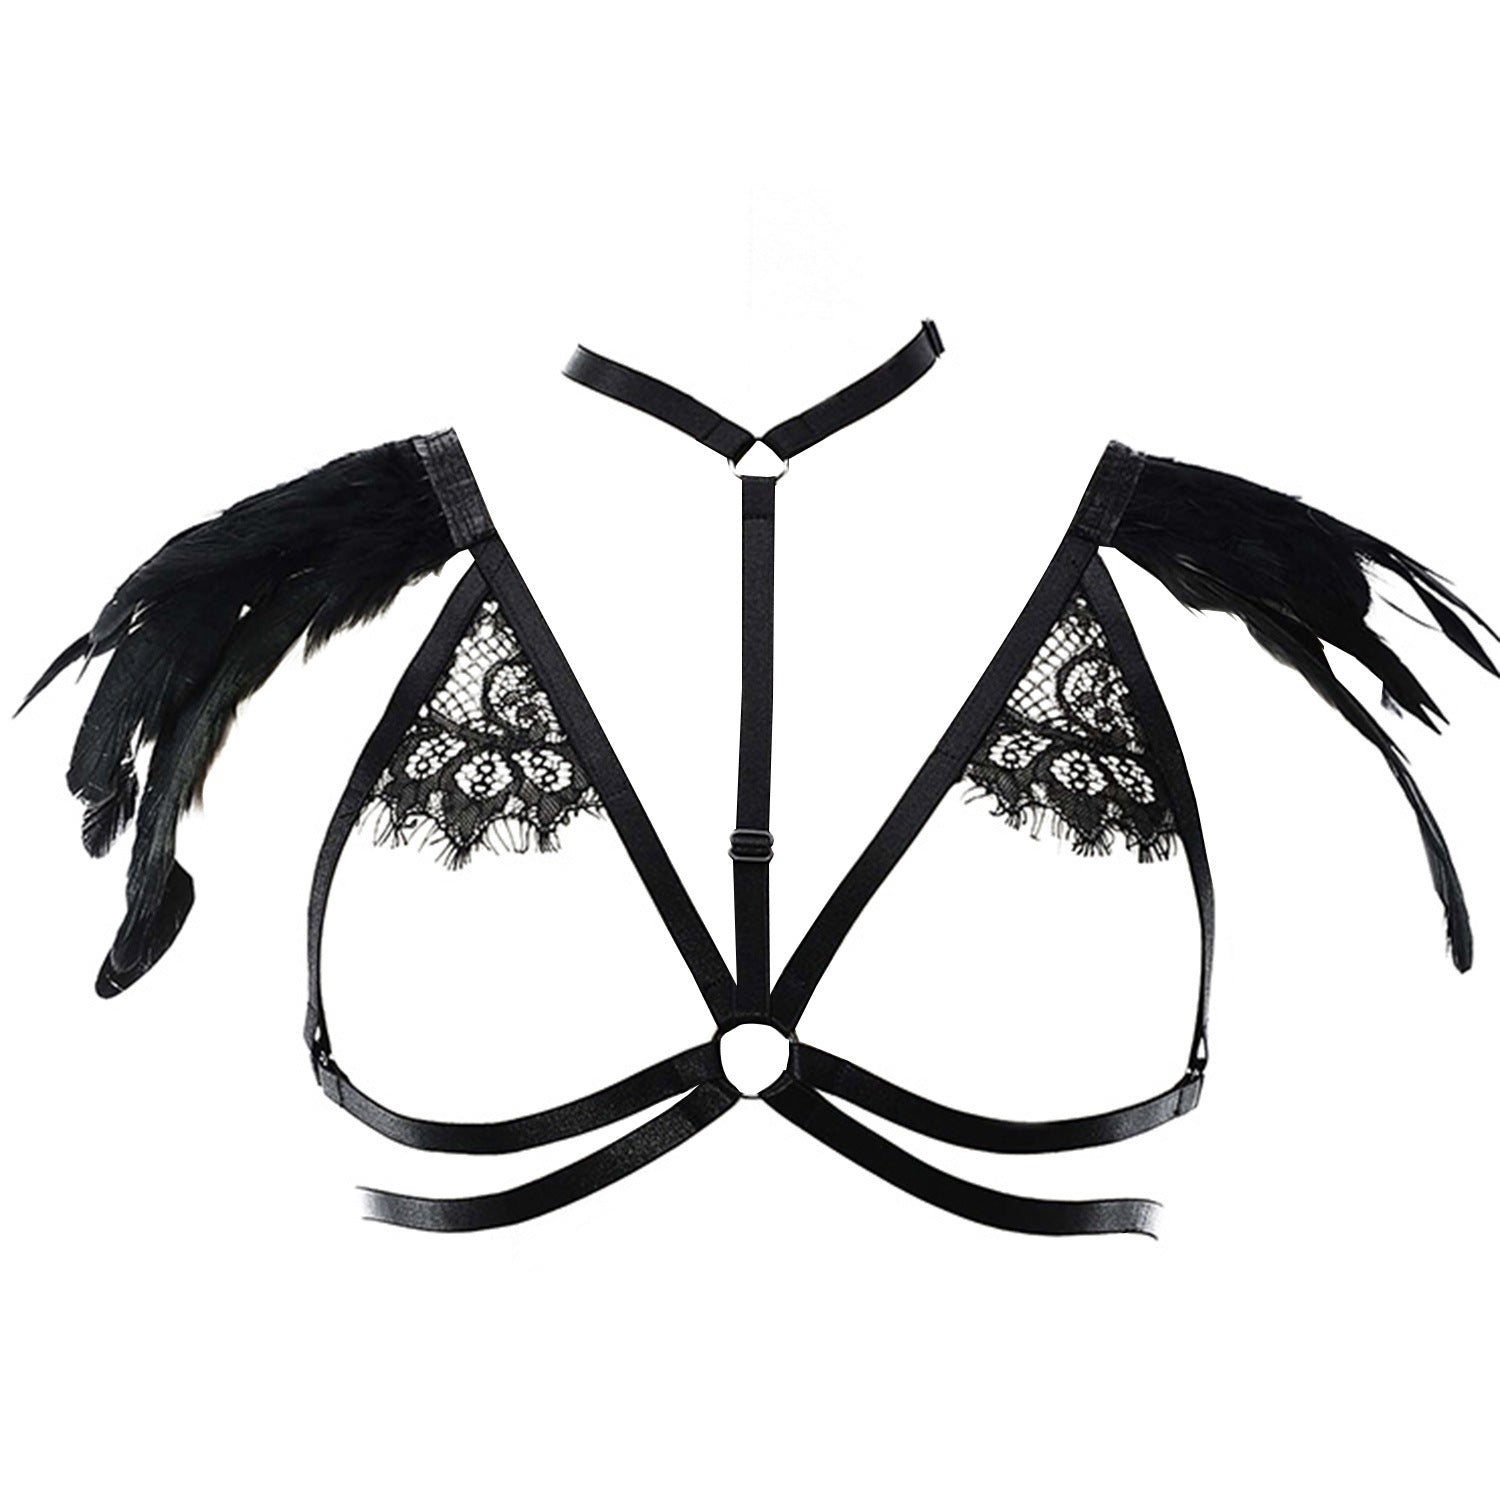 Submissive Sexy Bra Chubby Bondage Harness Lingerie Feather Bra